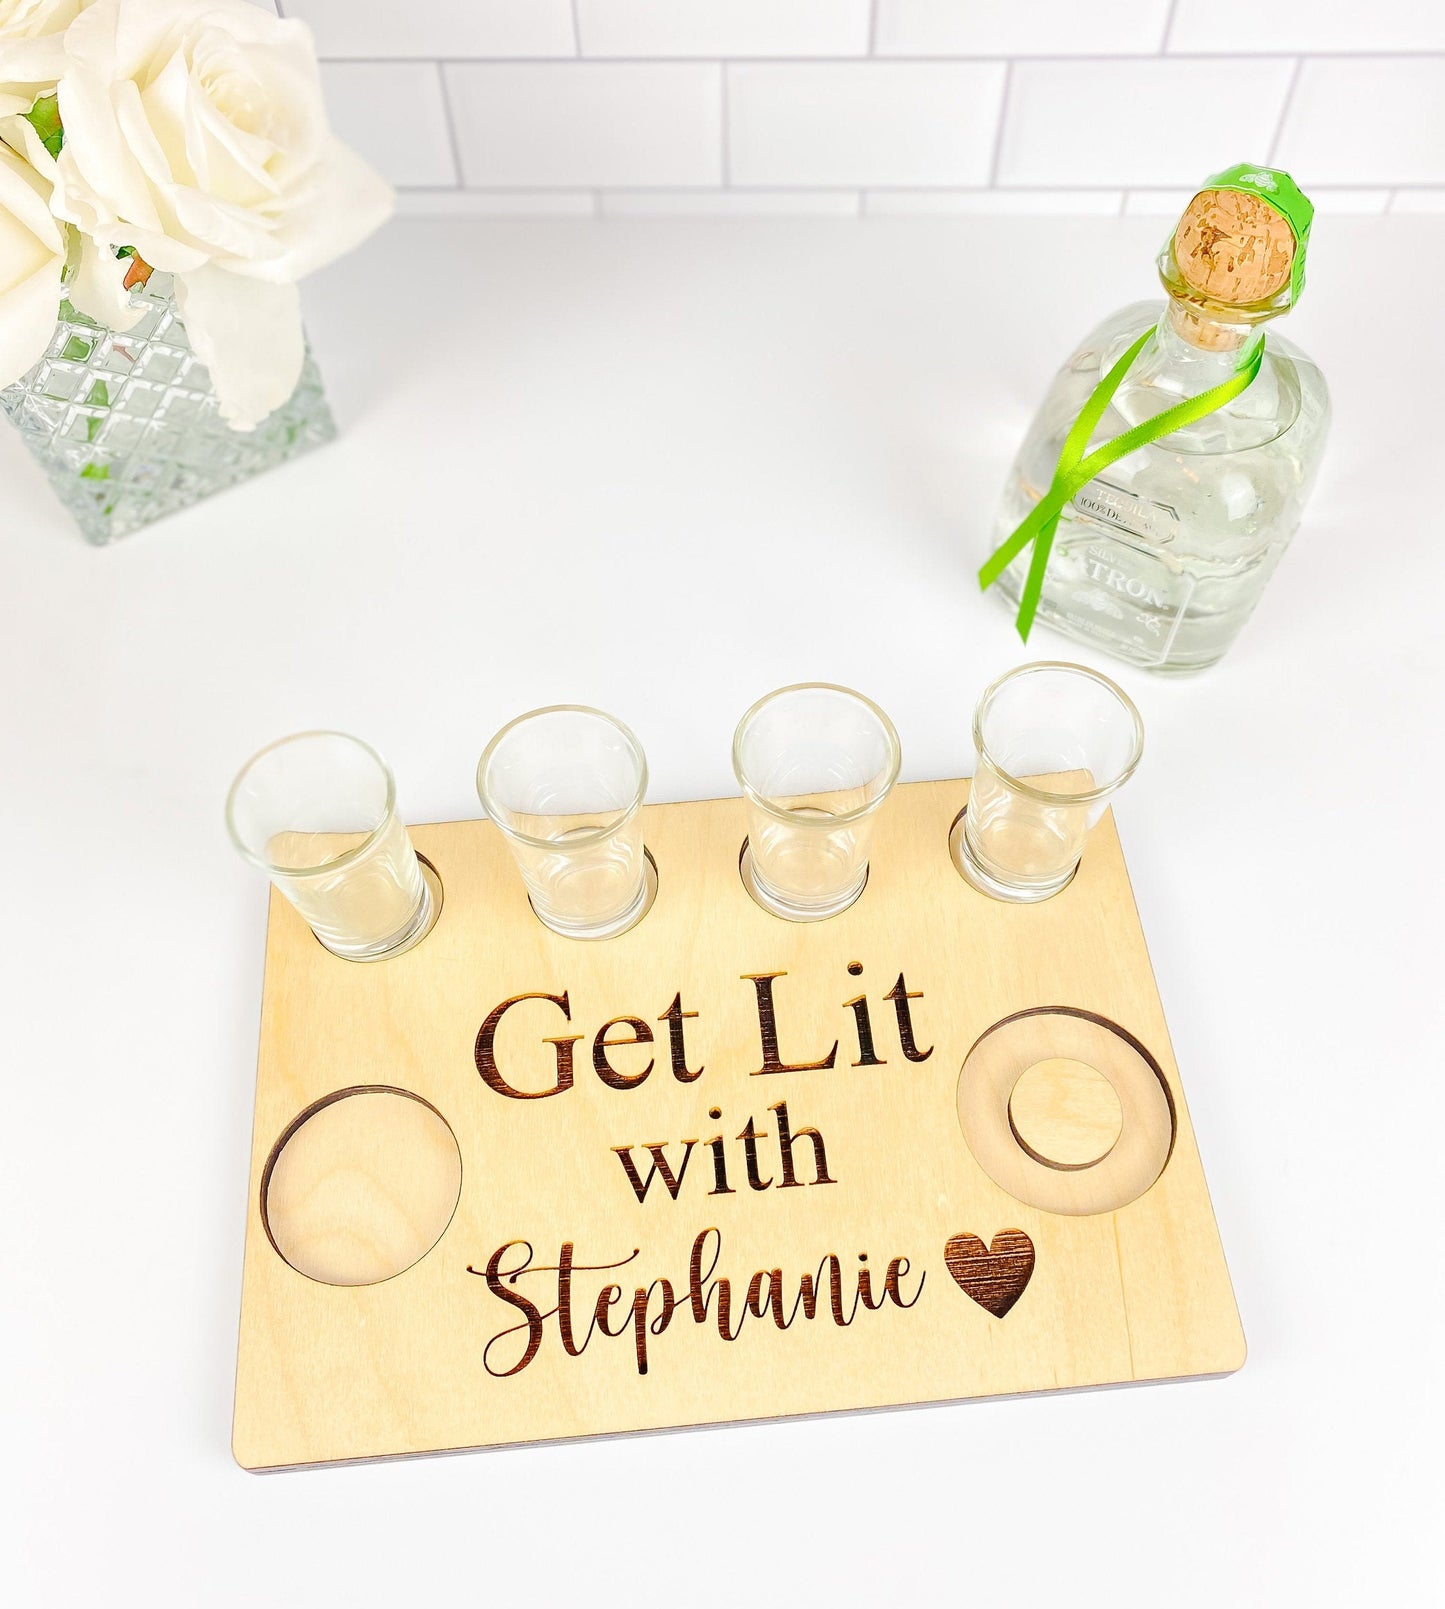 Customized Tequila Shot Tray